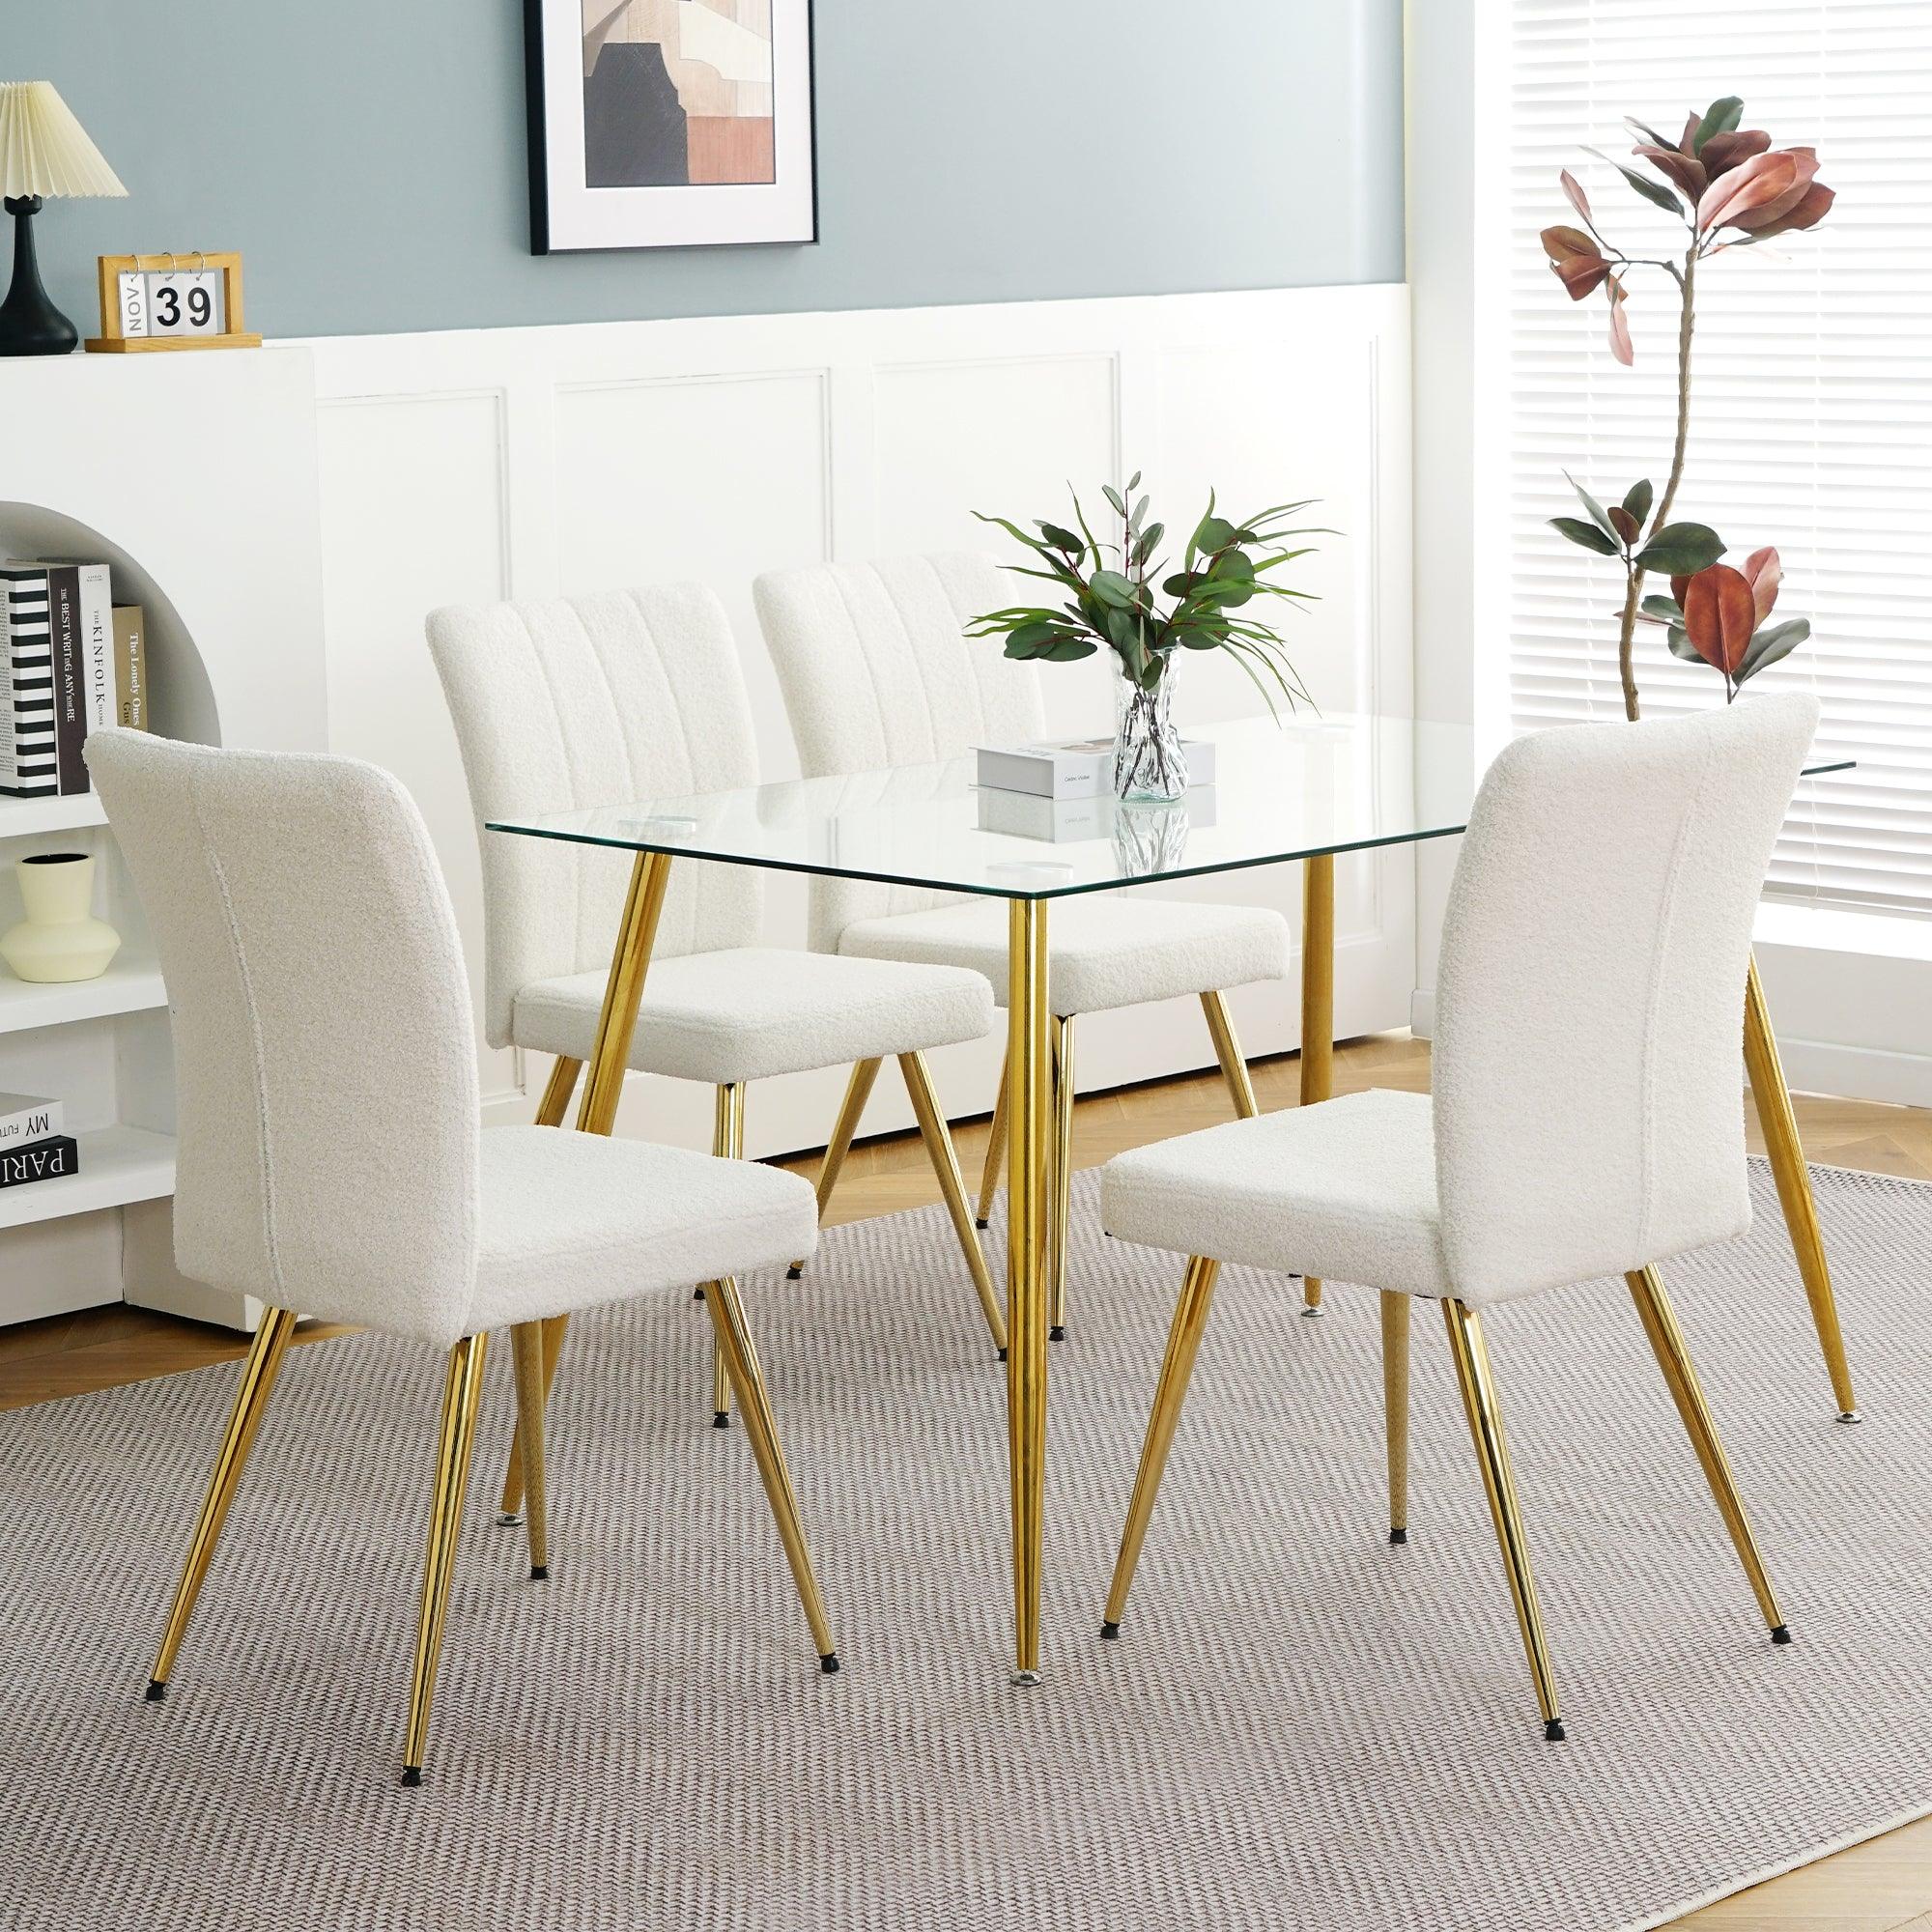 🆓🚛 Modern Teddy Wool Dining Chair, Upholstered Chair With Fabric Accent Side Chair With Gold-Plated Metal Legs, Set Of 4, White